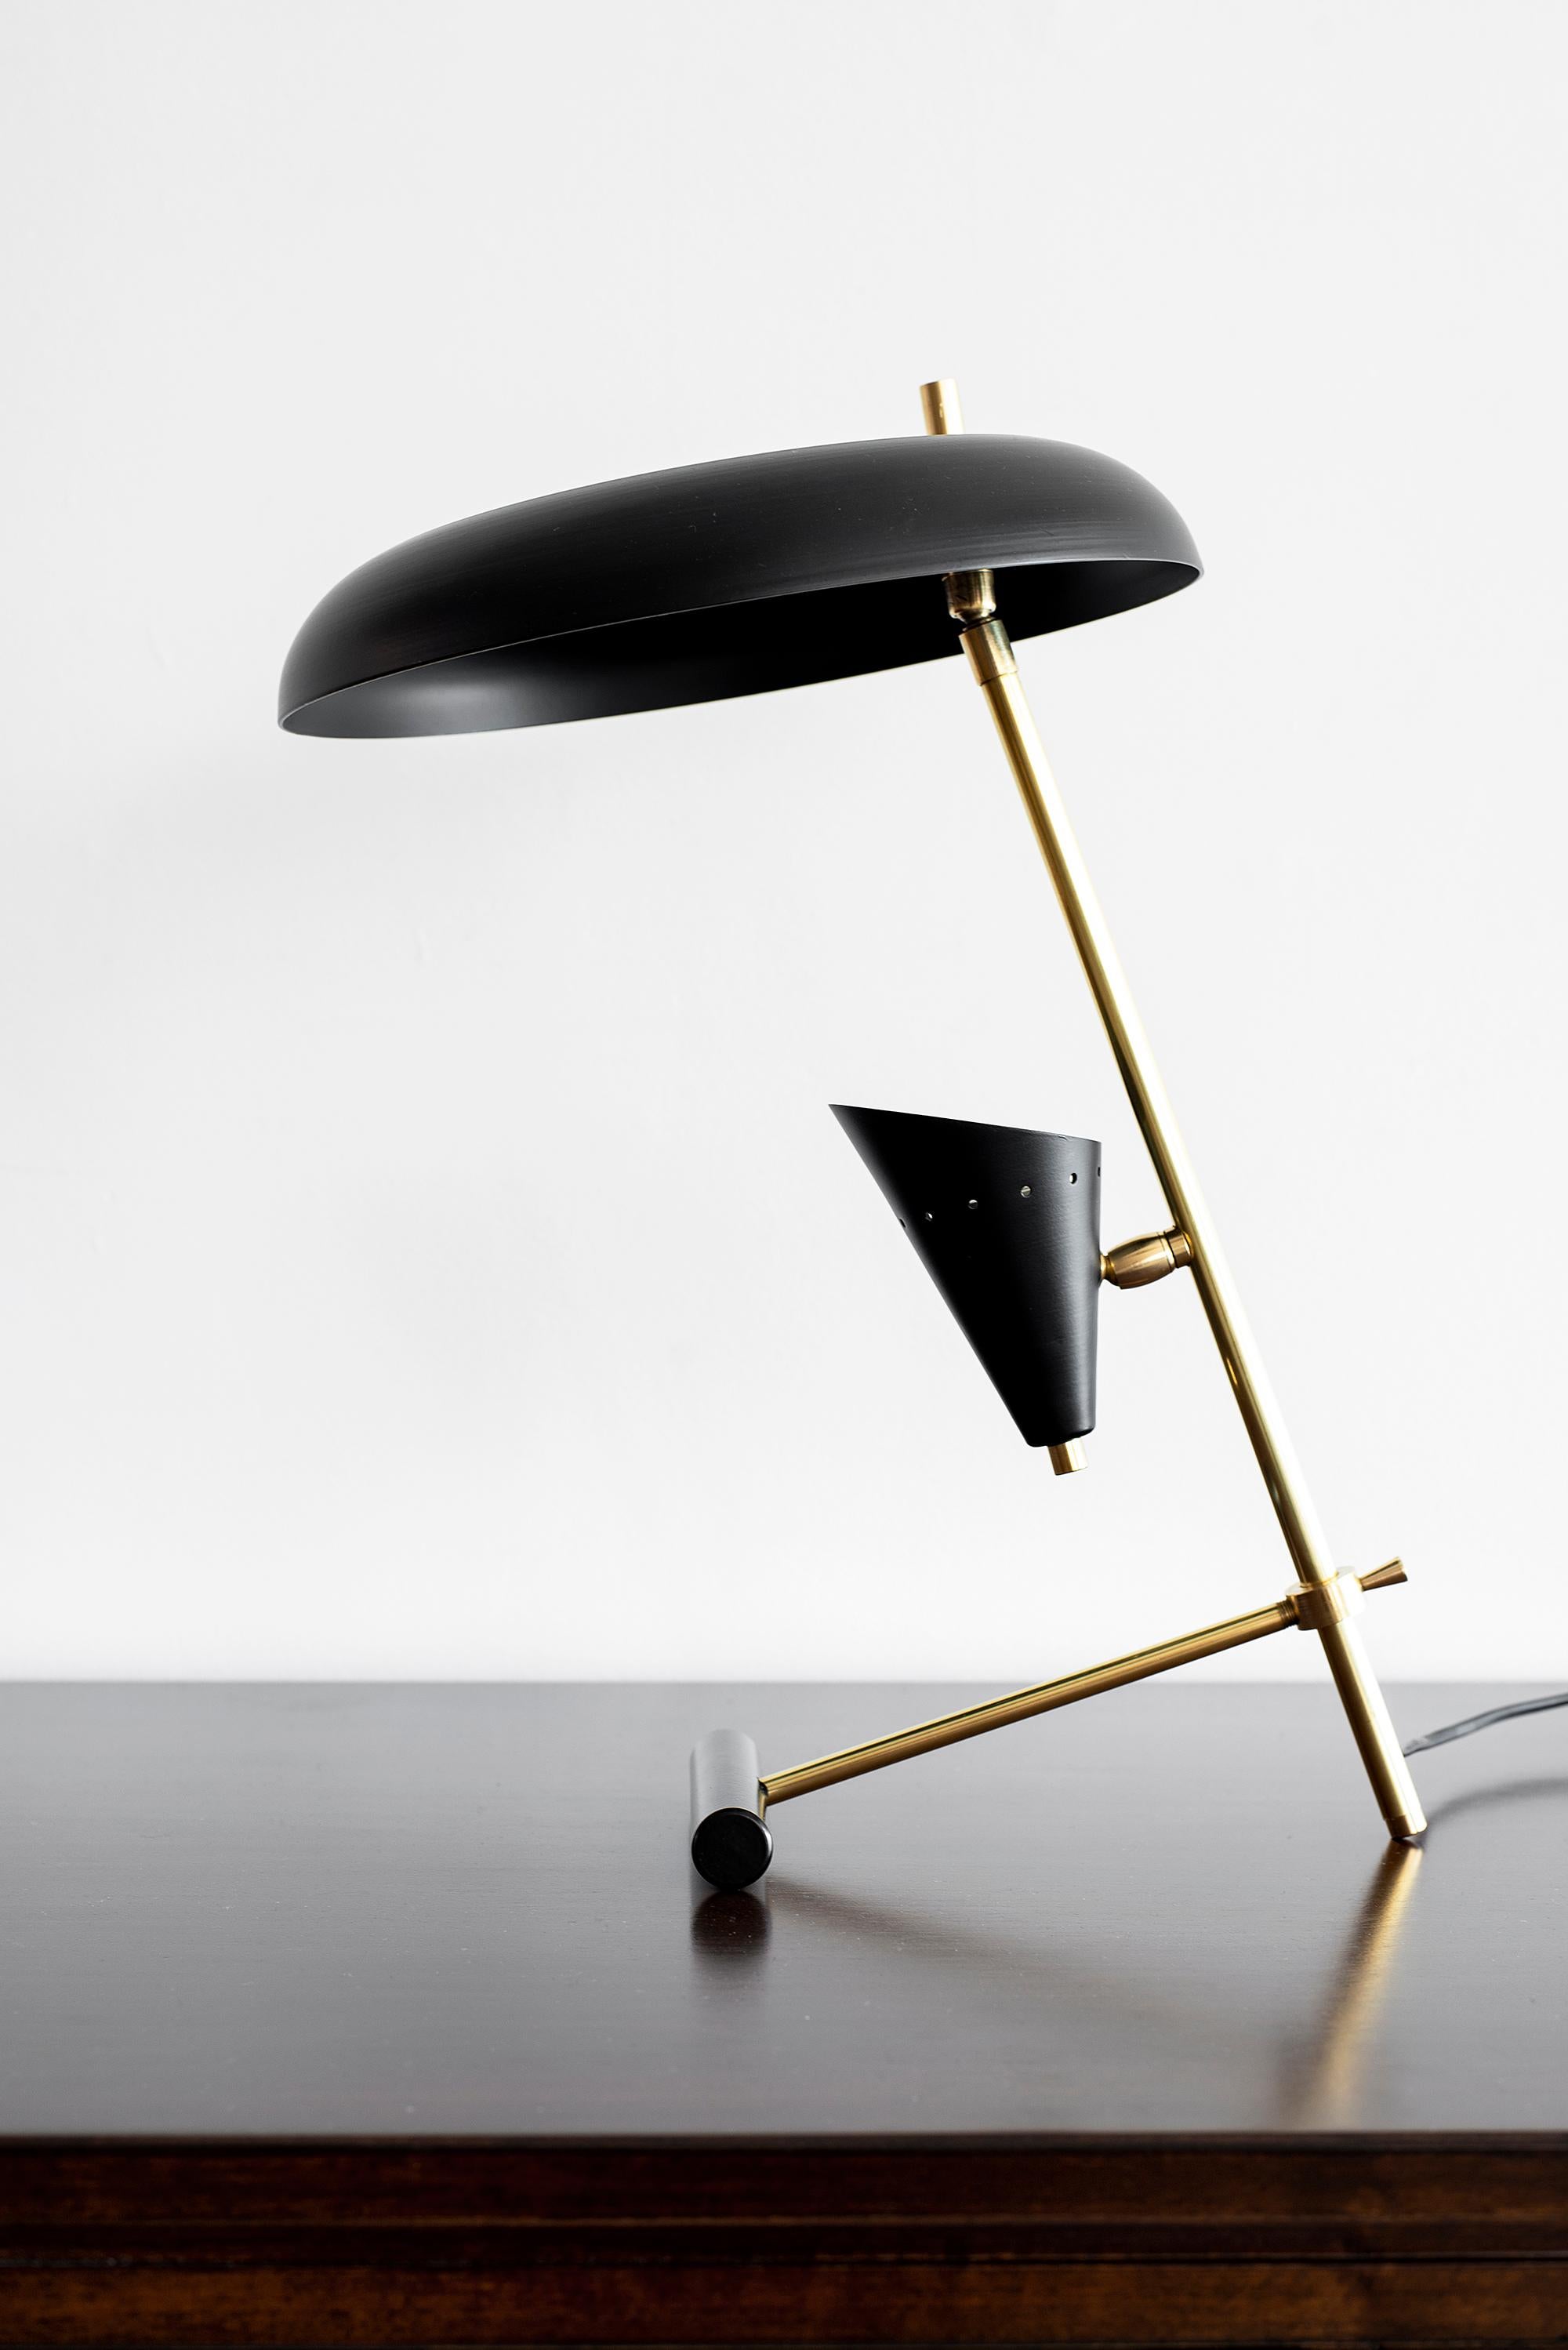 Newly produced in Italy - architectural desk lamp in the style of Gino Sarfatti.
Newly rewired.